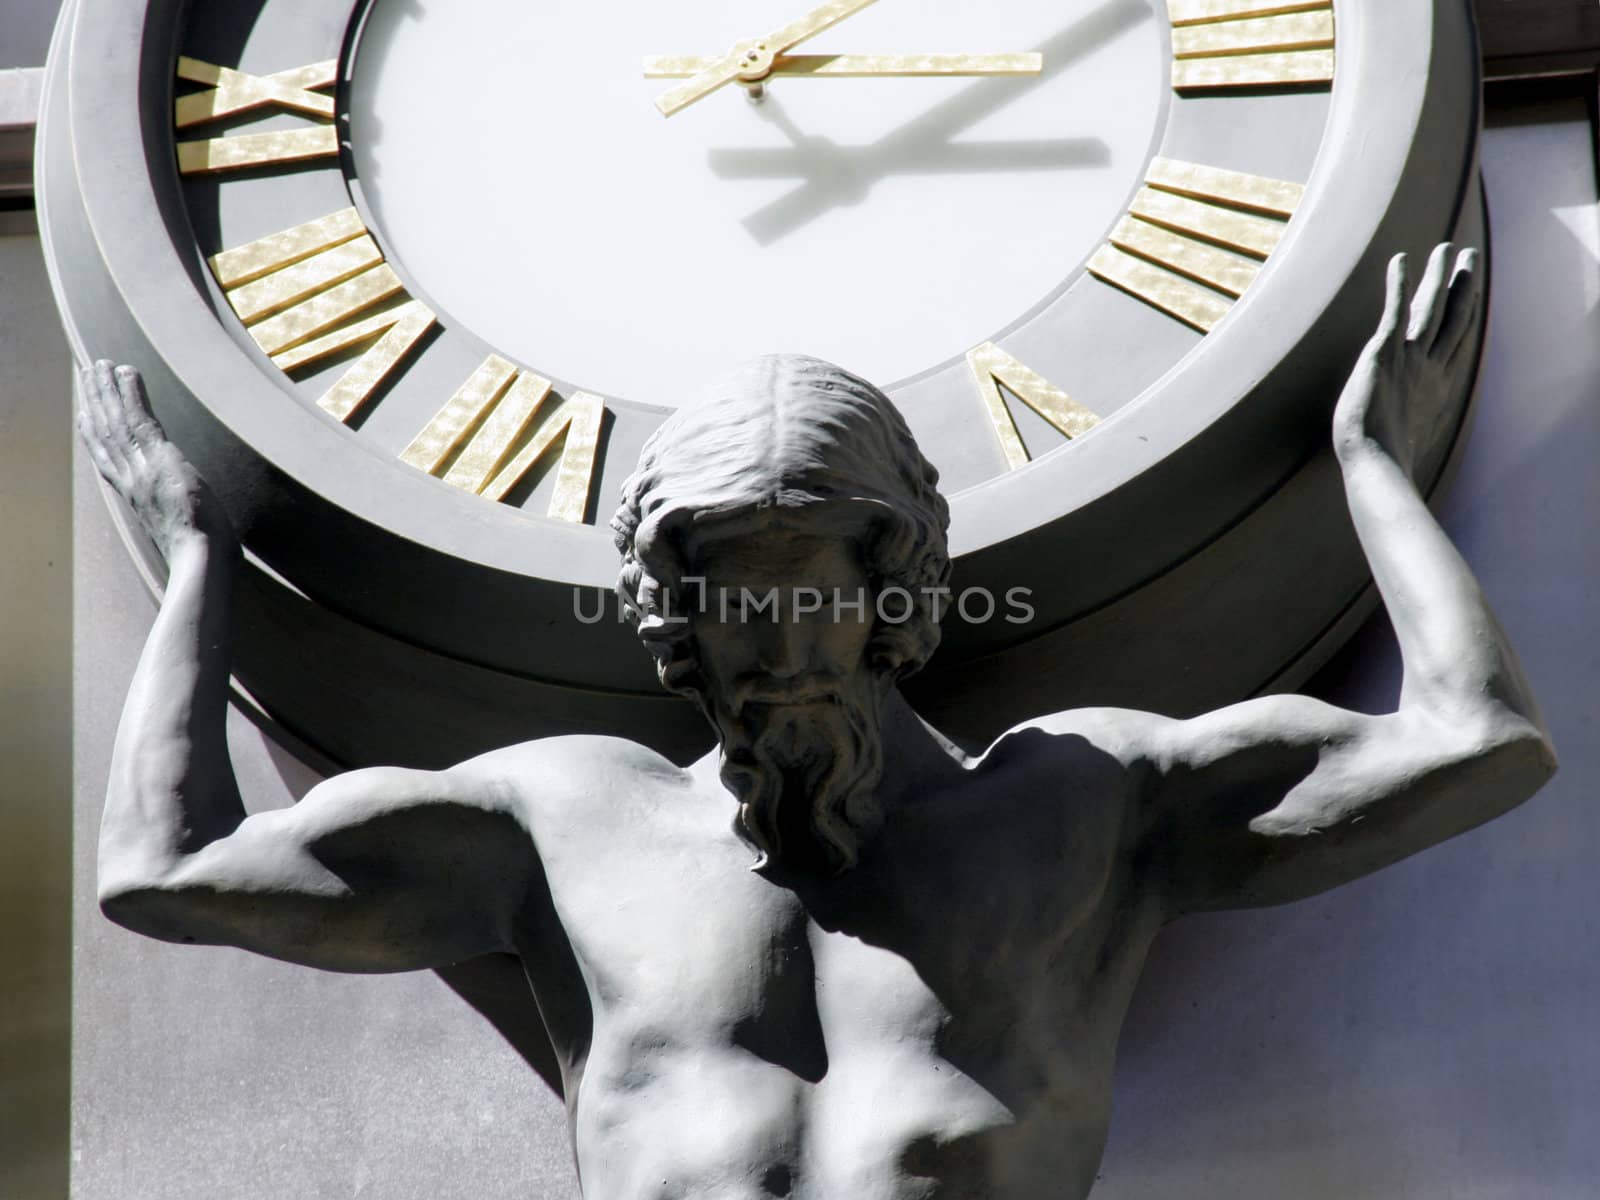 Time Pressure by thorsten